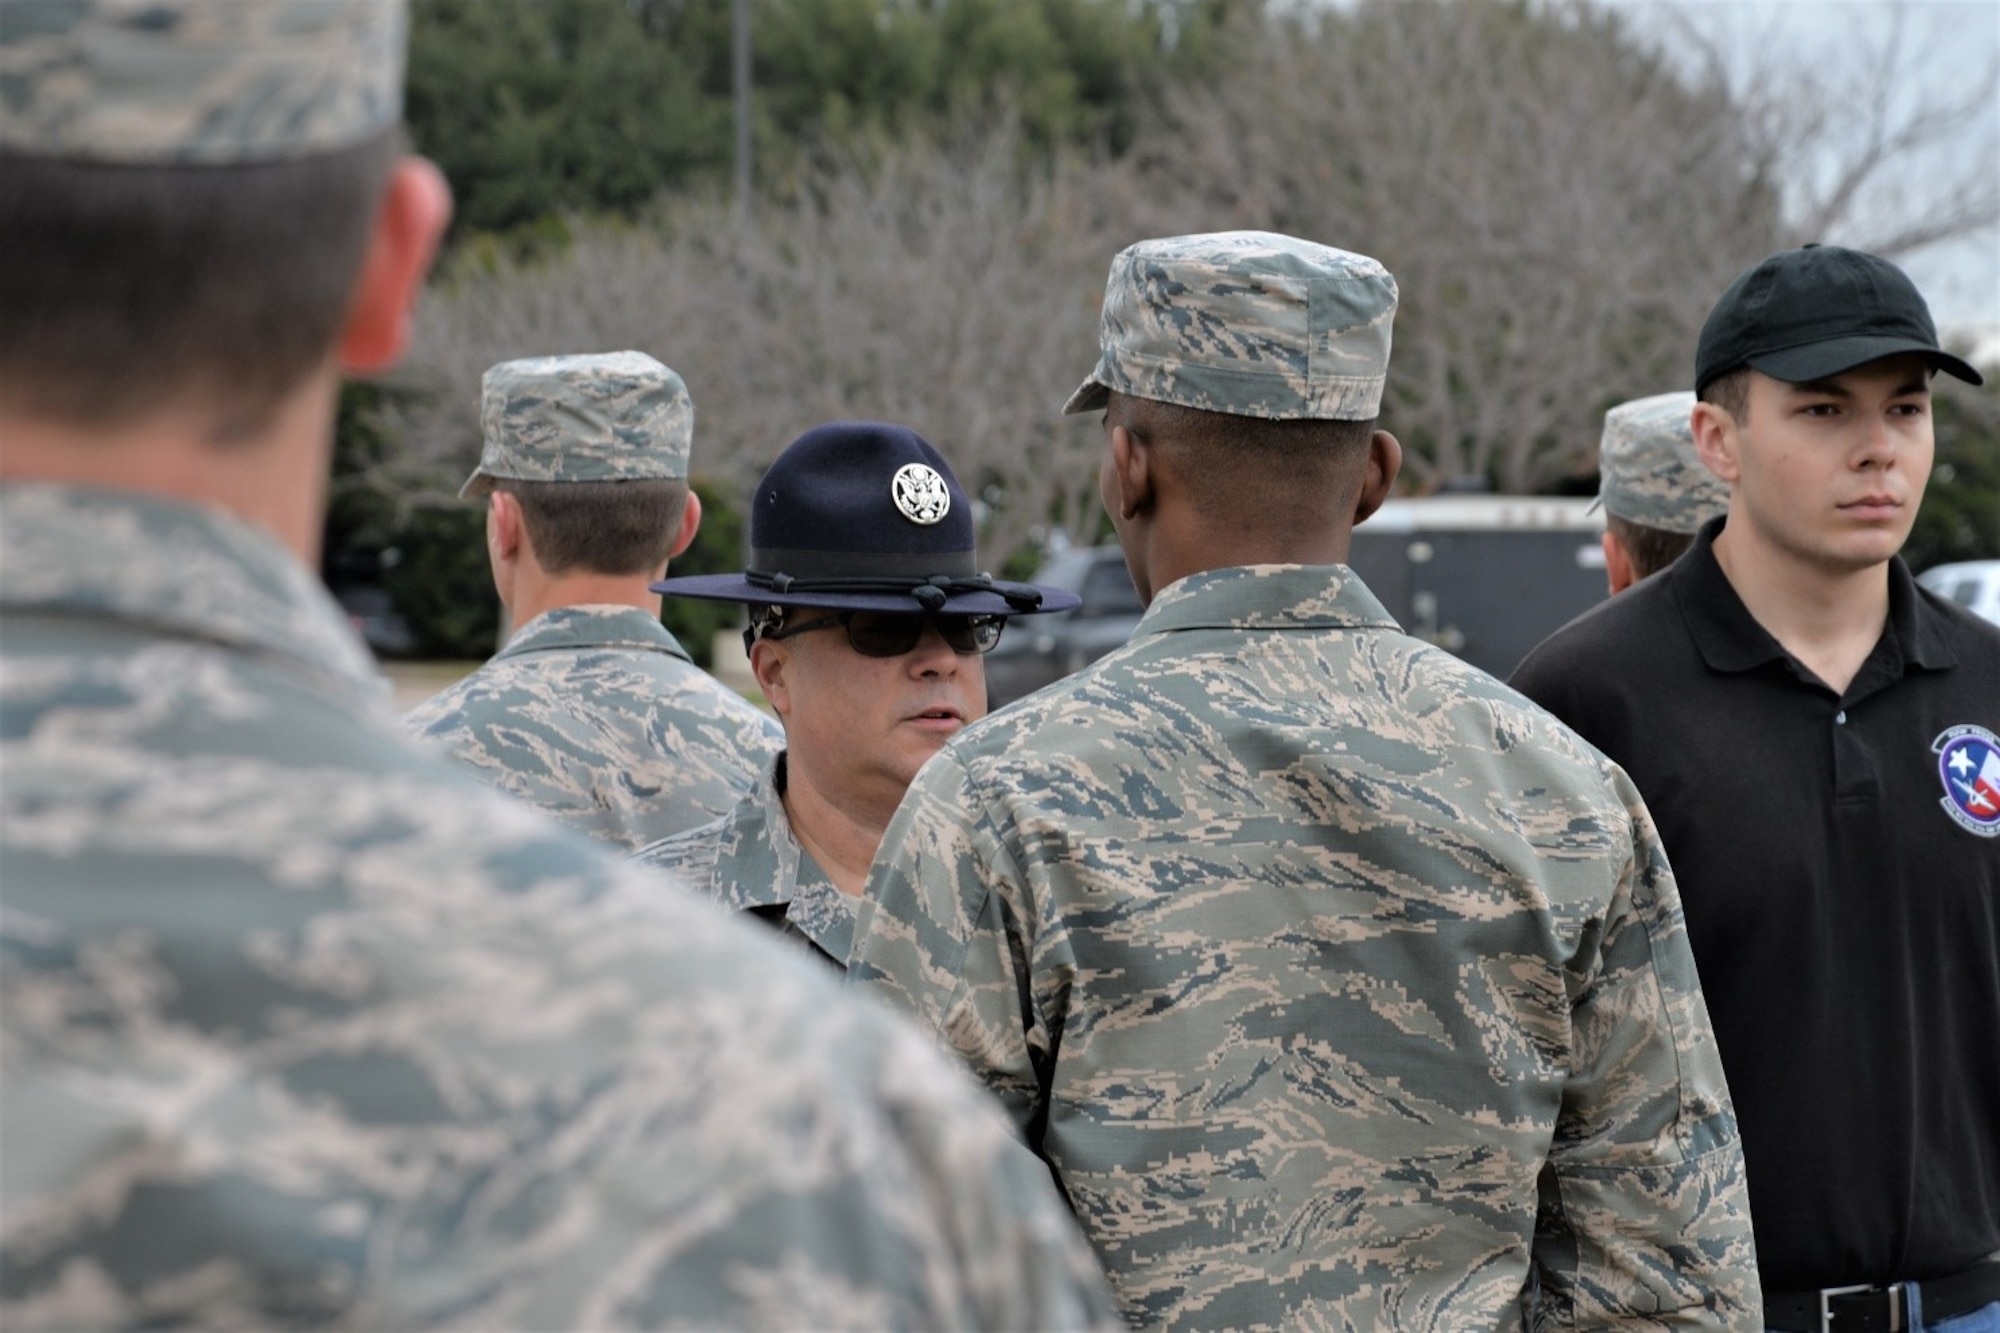 Master Sgt. Edward Rivera, a military training instructor with the 433rd Training Squadron at Joint Base San Antonio-Lackland, instructs AFROTC Det. 845 cadets at Texas Christian University, Fort Worth, Texas, on proper military drill, ceremony, customs and courtesies, leadership, and teamwork.  (Photo by Clayton Church, US Army Corps of Engineers)